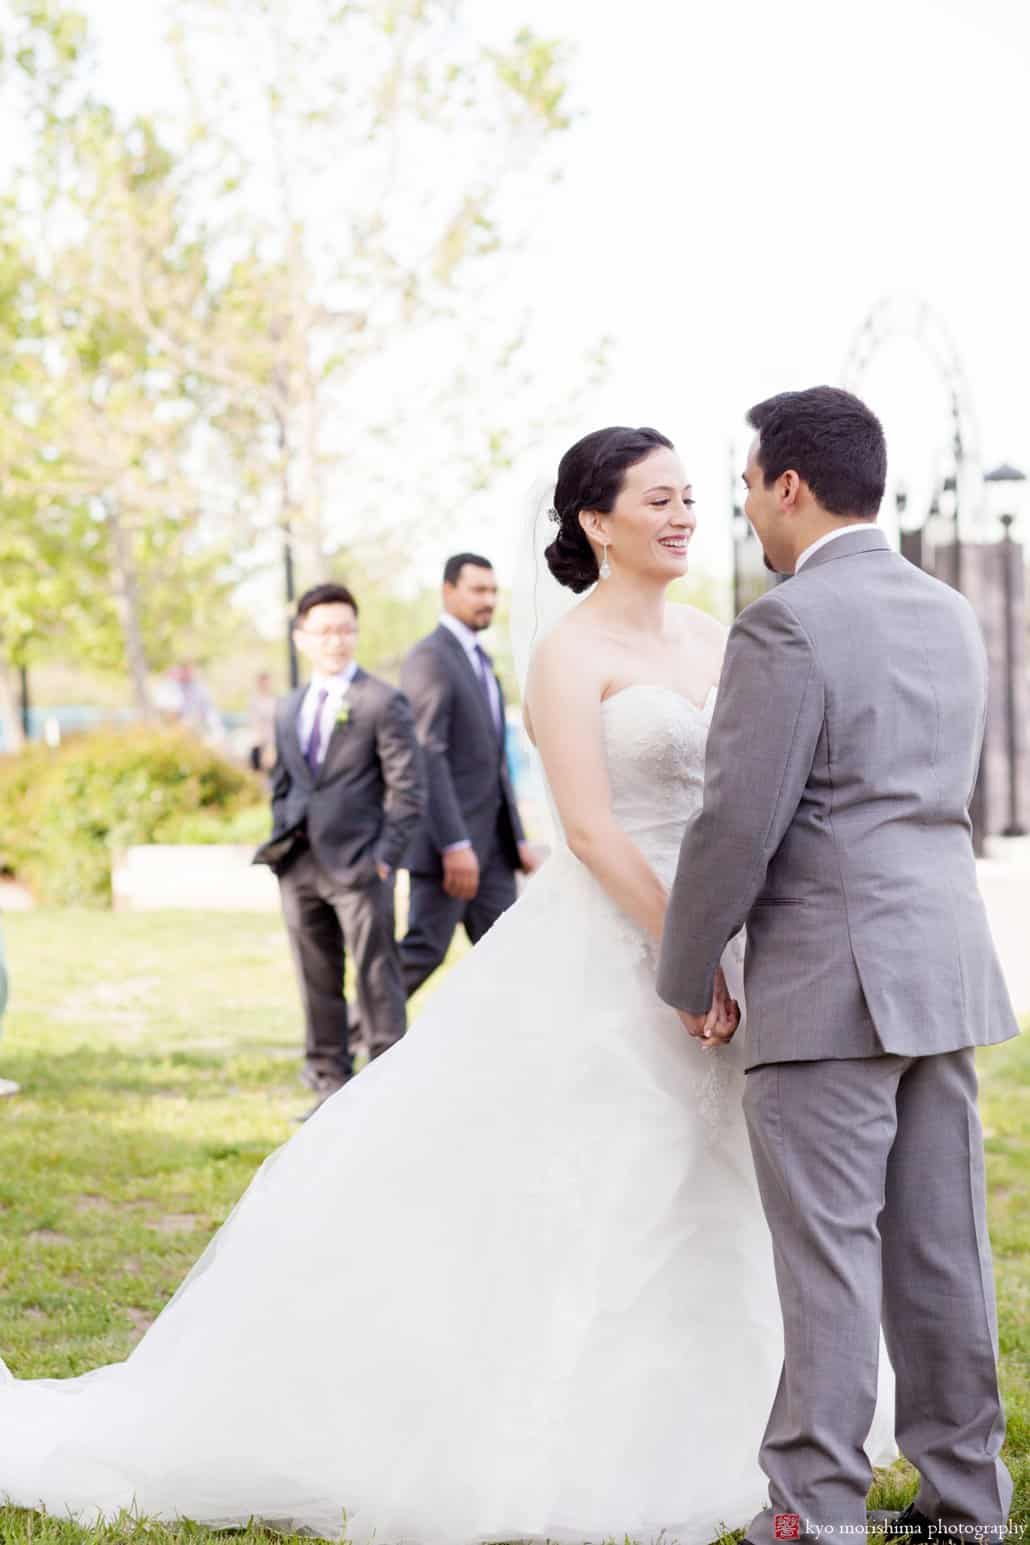 Wedding portrait at Weehawken Waterfront Park with groomsmen in background, photographed by Kyo Morishima